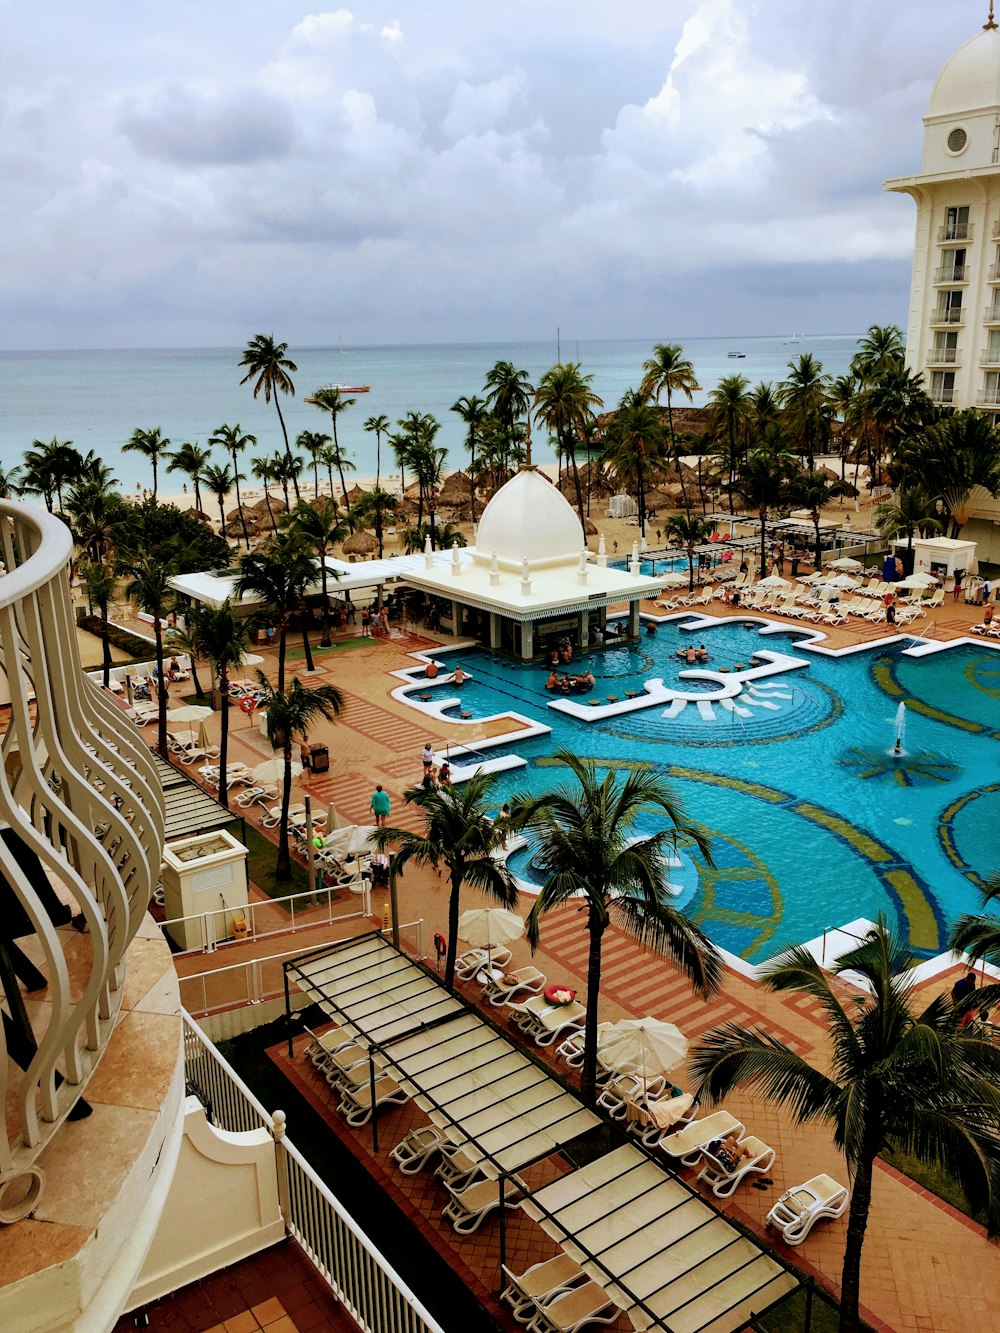 a view of a resort pool from a balcony